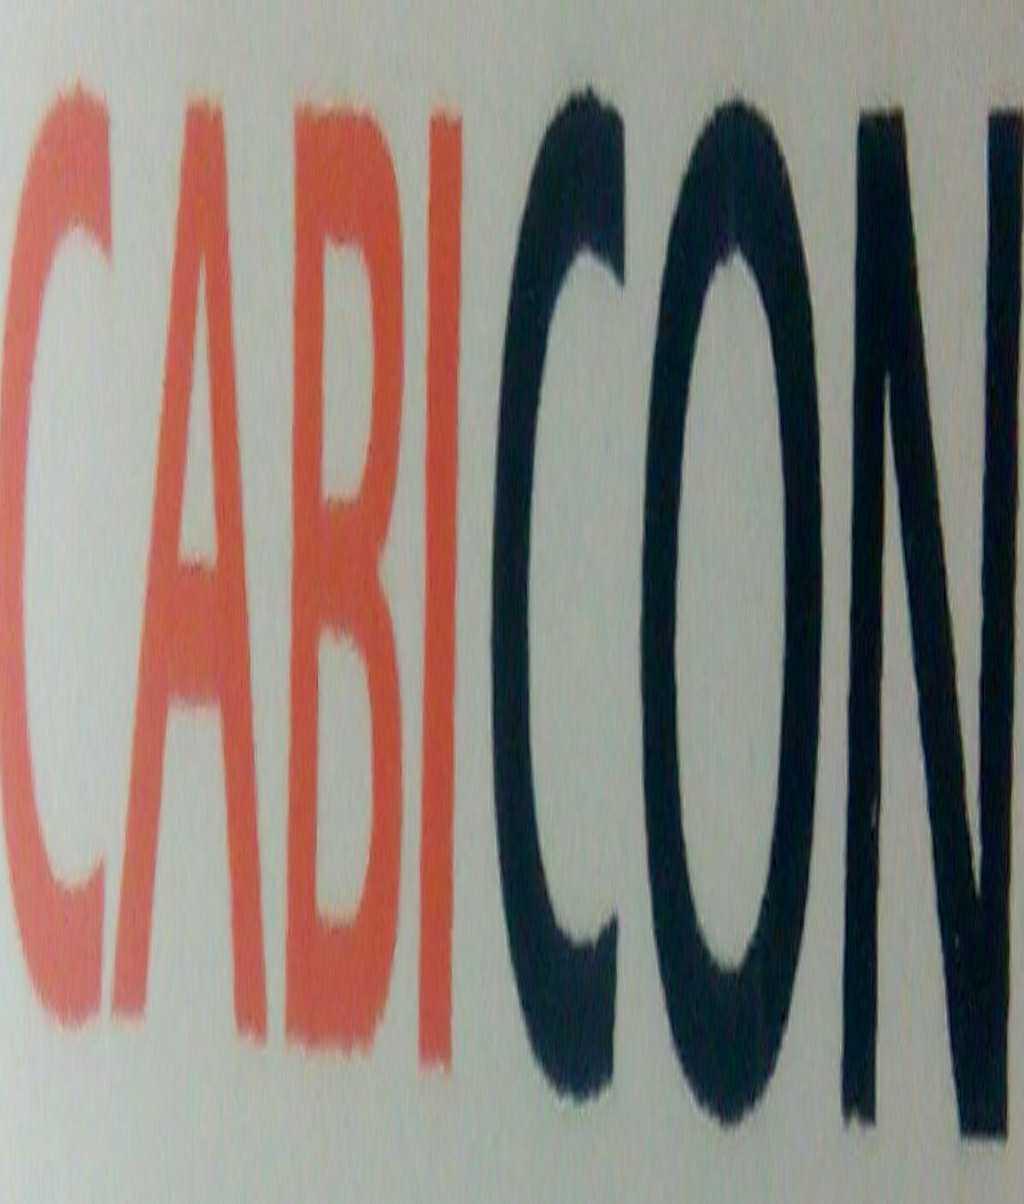 CABICON BOX AND LORRY SERVICES PVT. LTD.